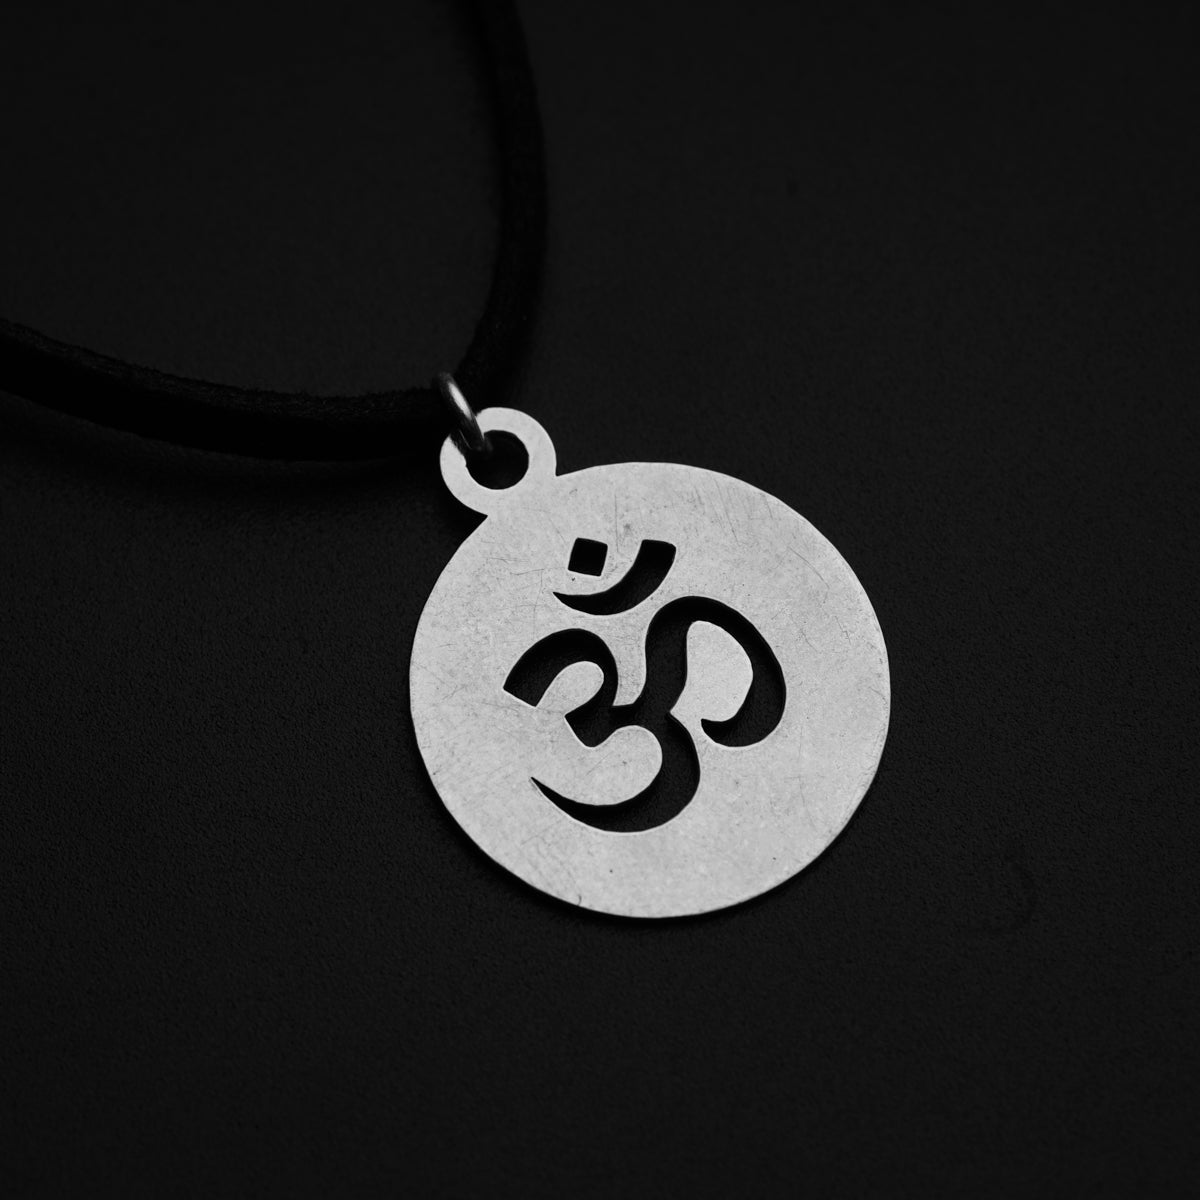 a silver pendant with an omen symbol on a black background